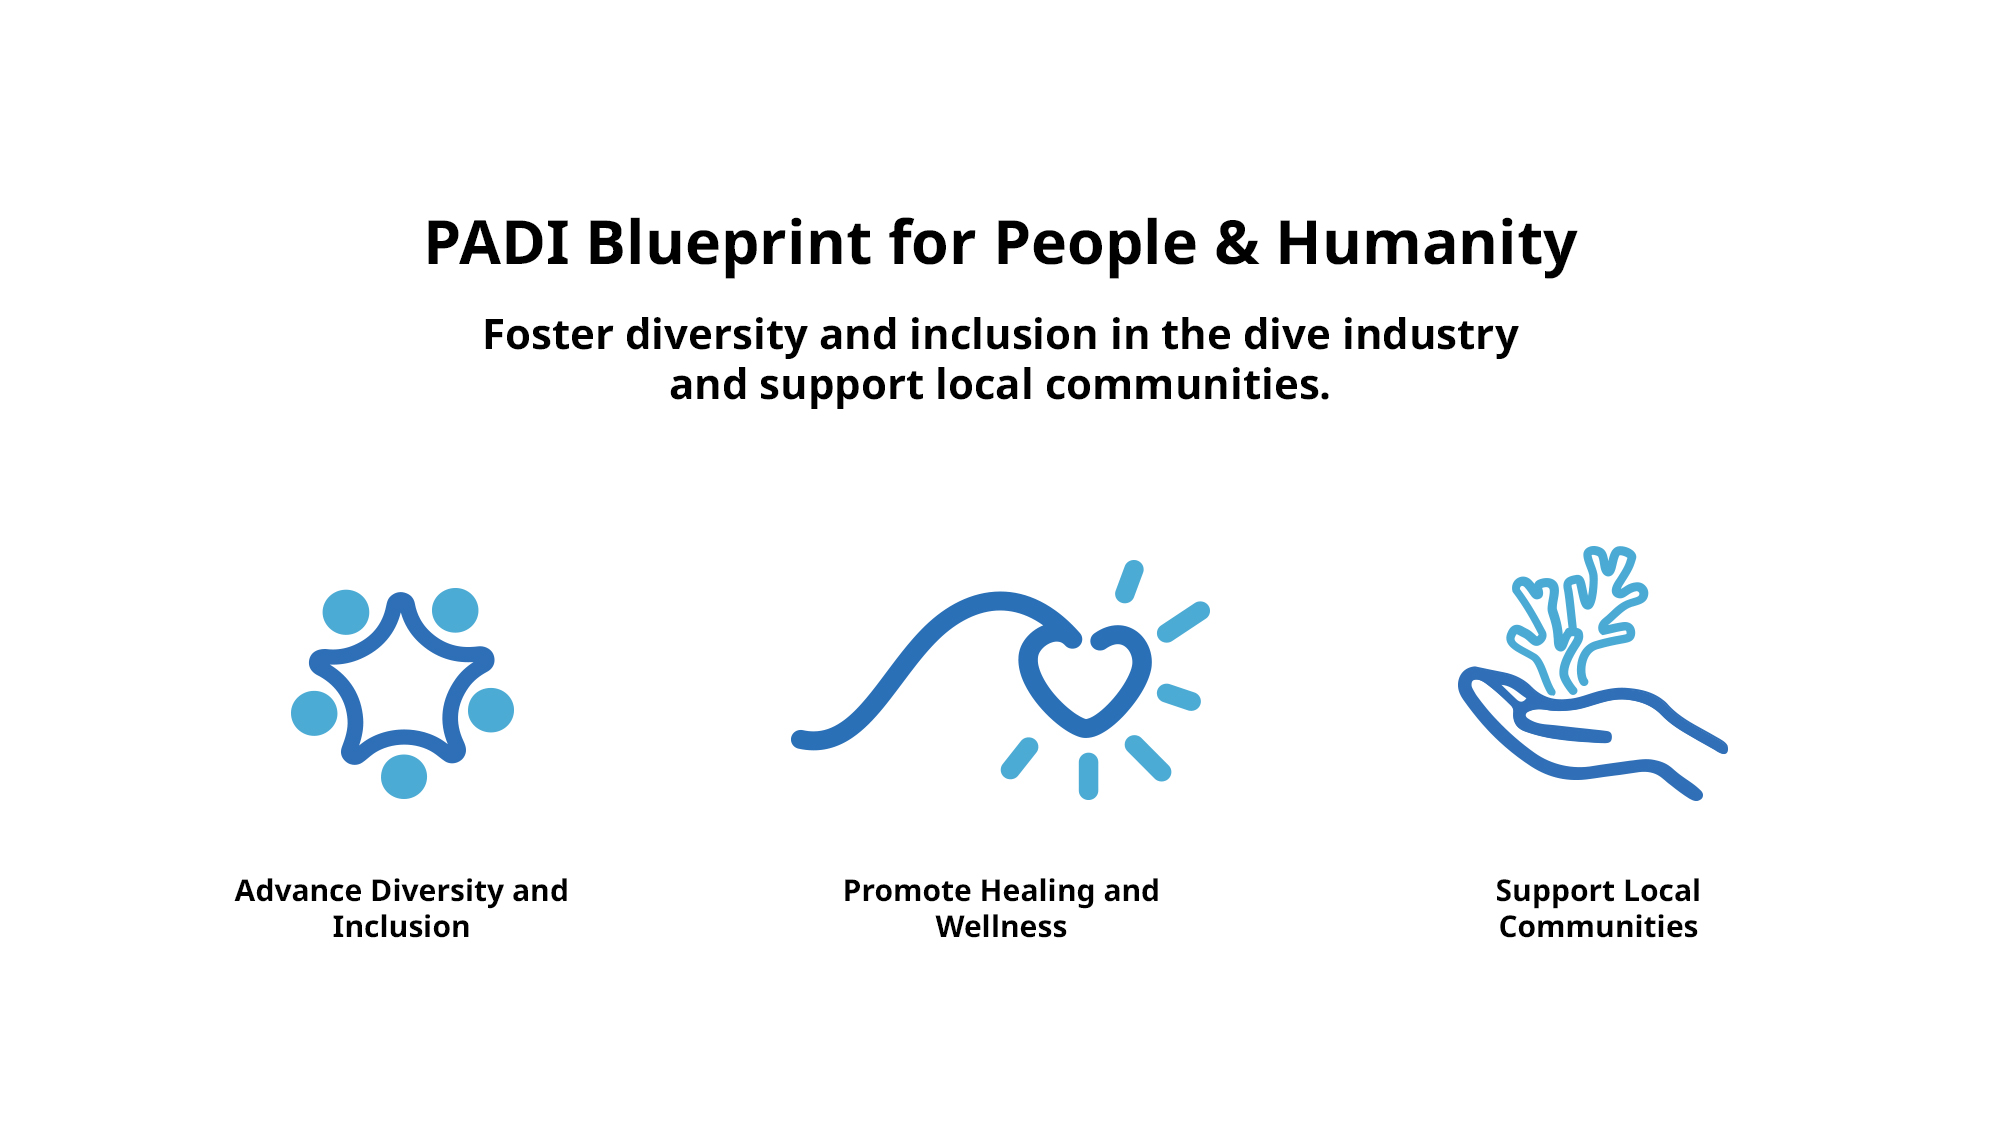 padi blueprint for people and humanity